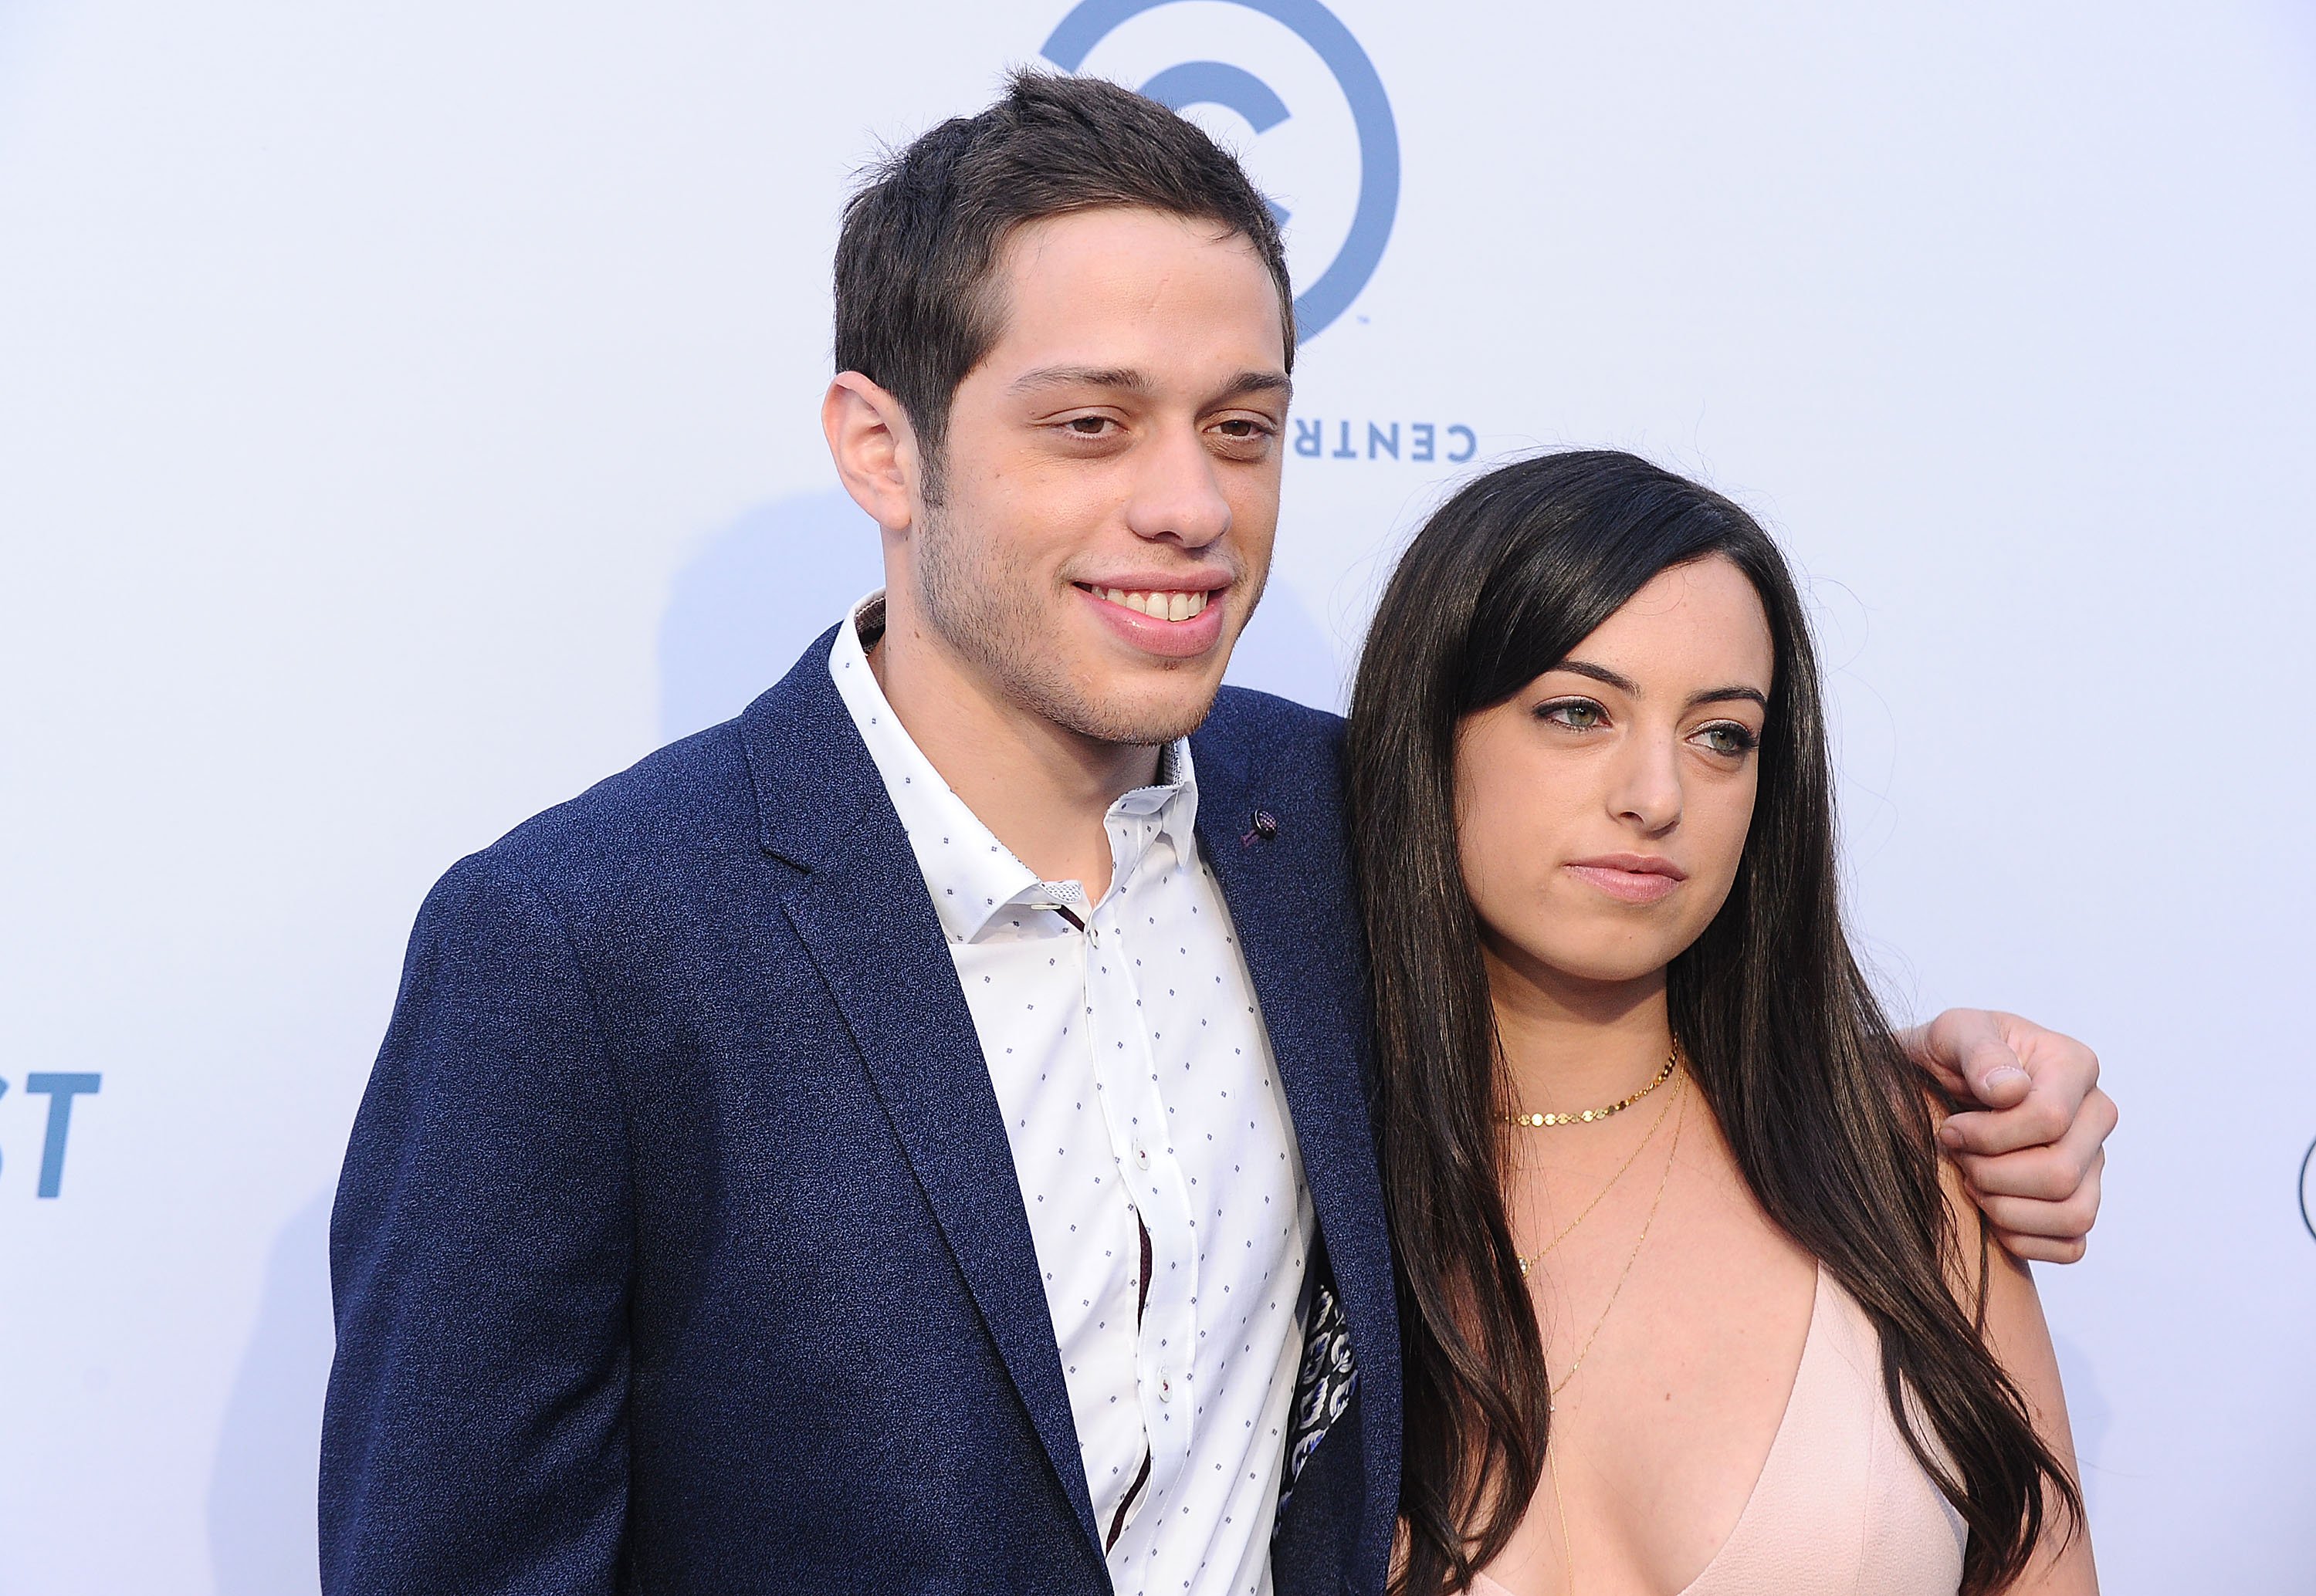 Pete Davidson and Cazzie David attend the Comedy Central Roast of Rob Lowe at Sony Studios on August 27, 2016, in Los Angeles, California.